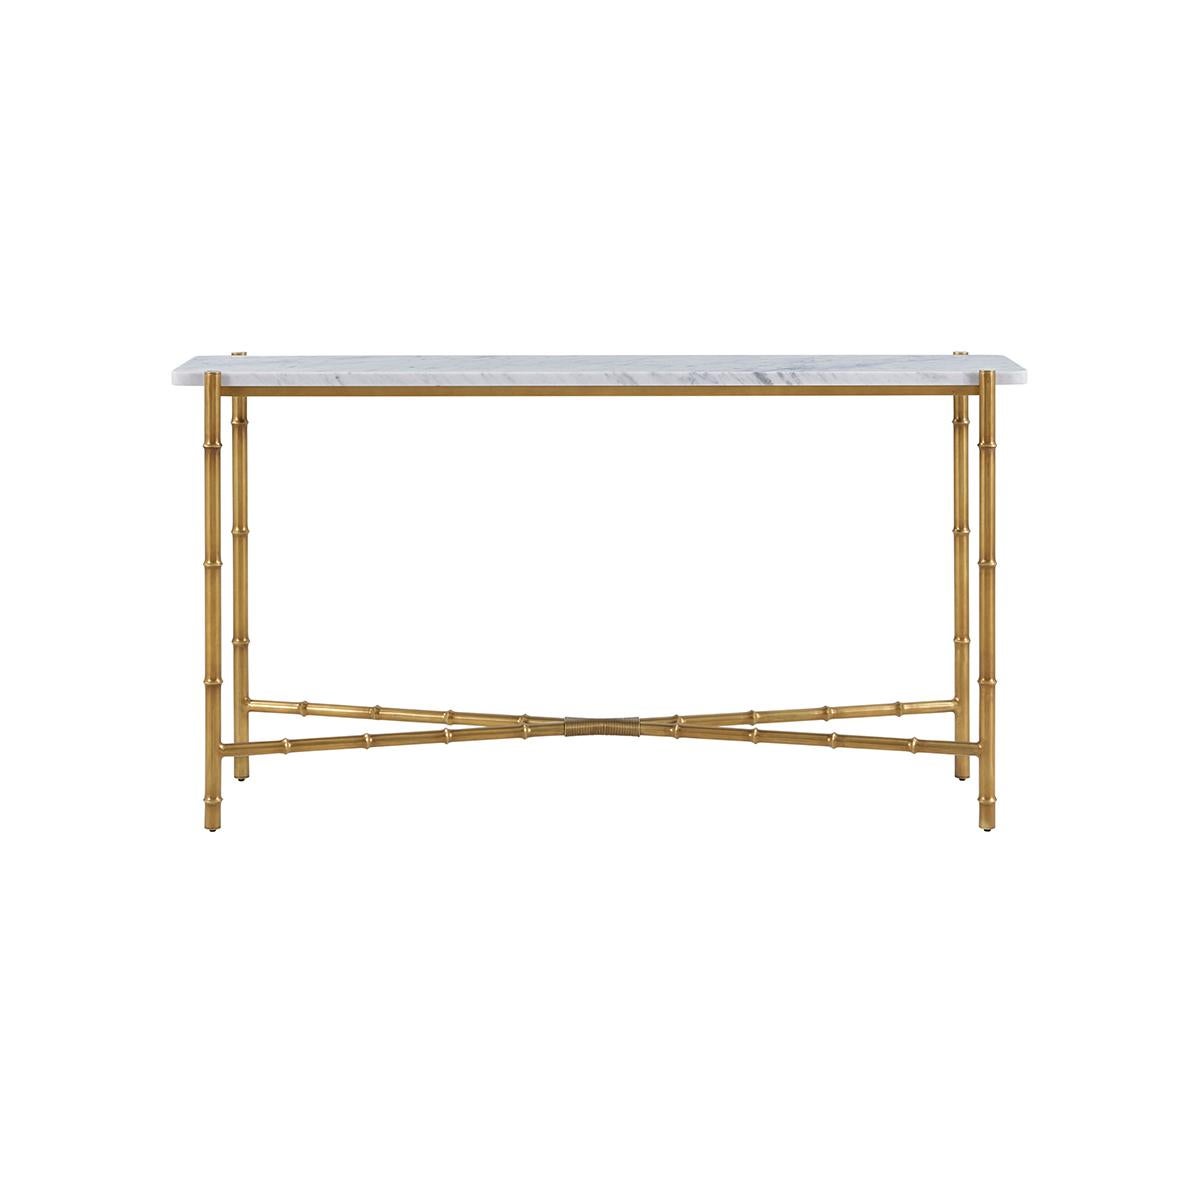 Slender lines form a light and airy design in this modern table. A graceful combination of white bianco marble atop an organic faux bois base in a satin bronze finish.

Dimensions: 60